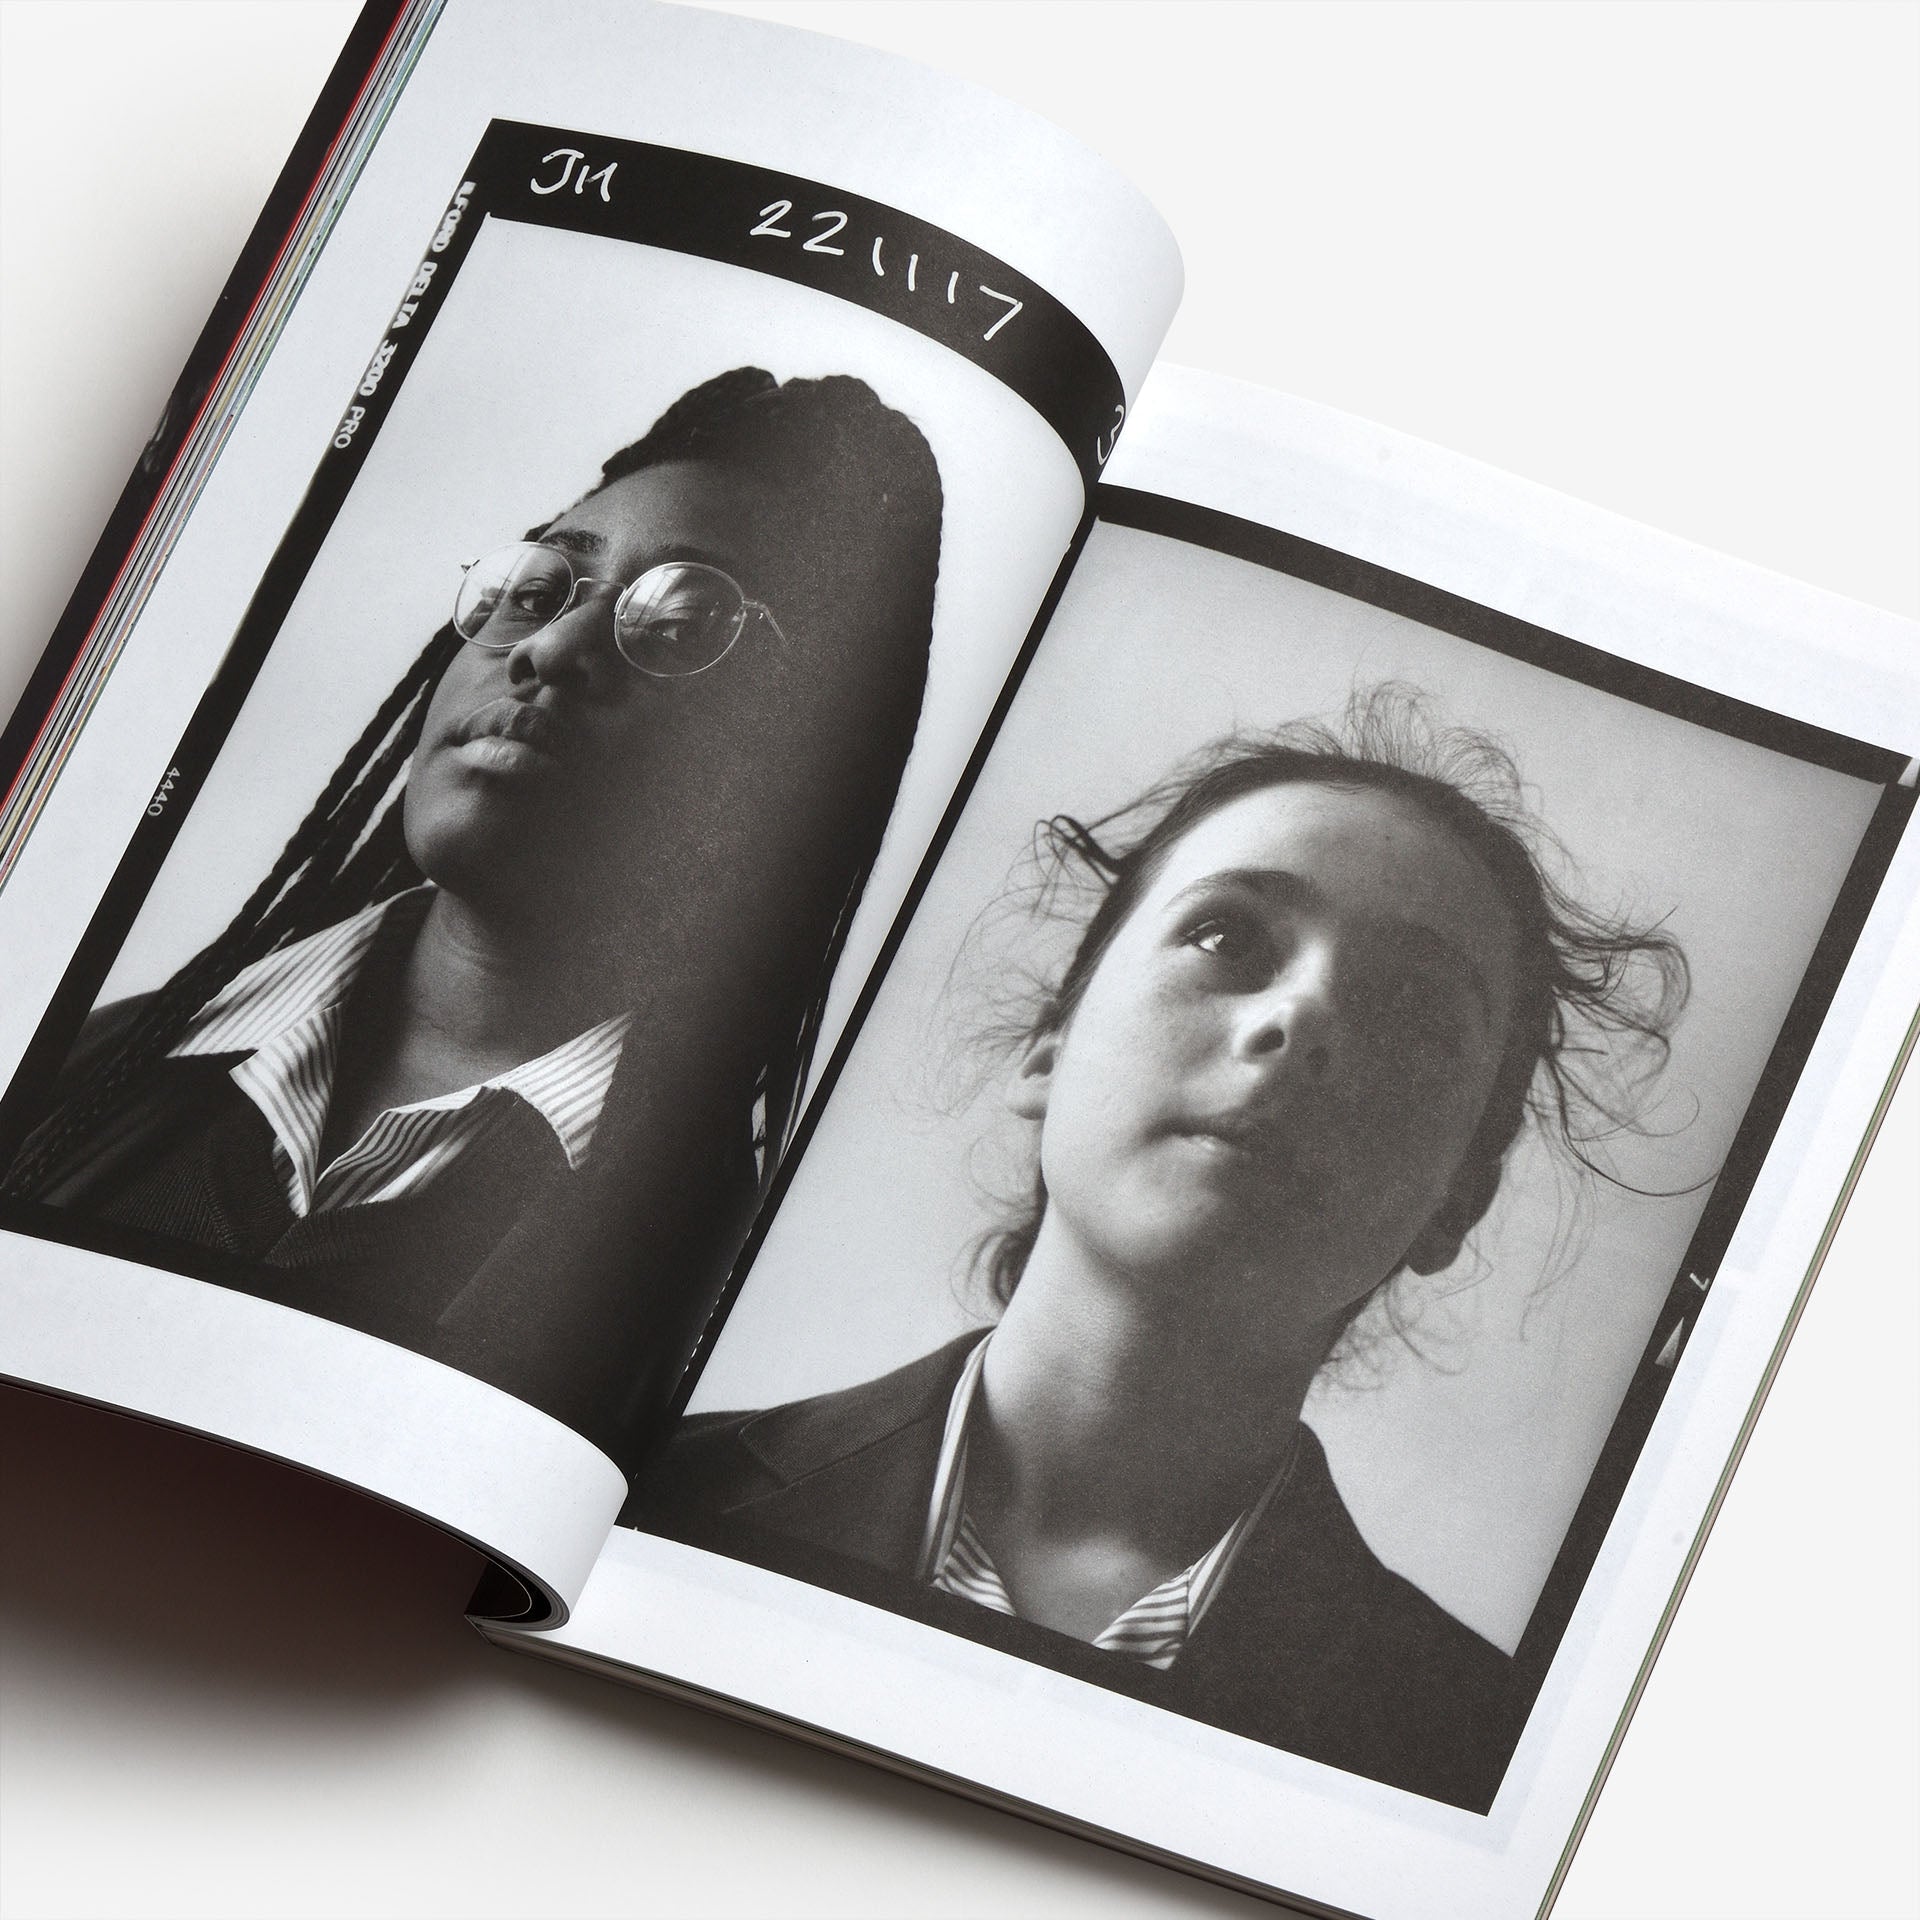 A Magazine Curated By Francesco Risso